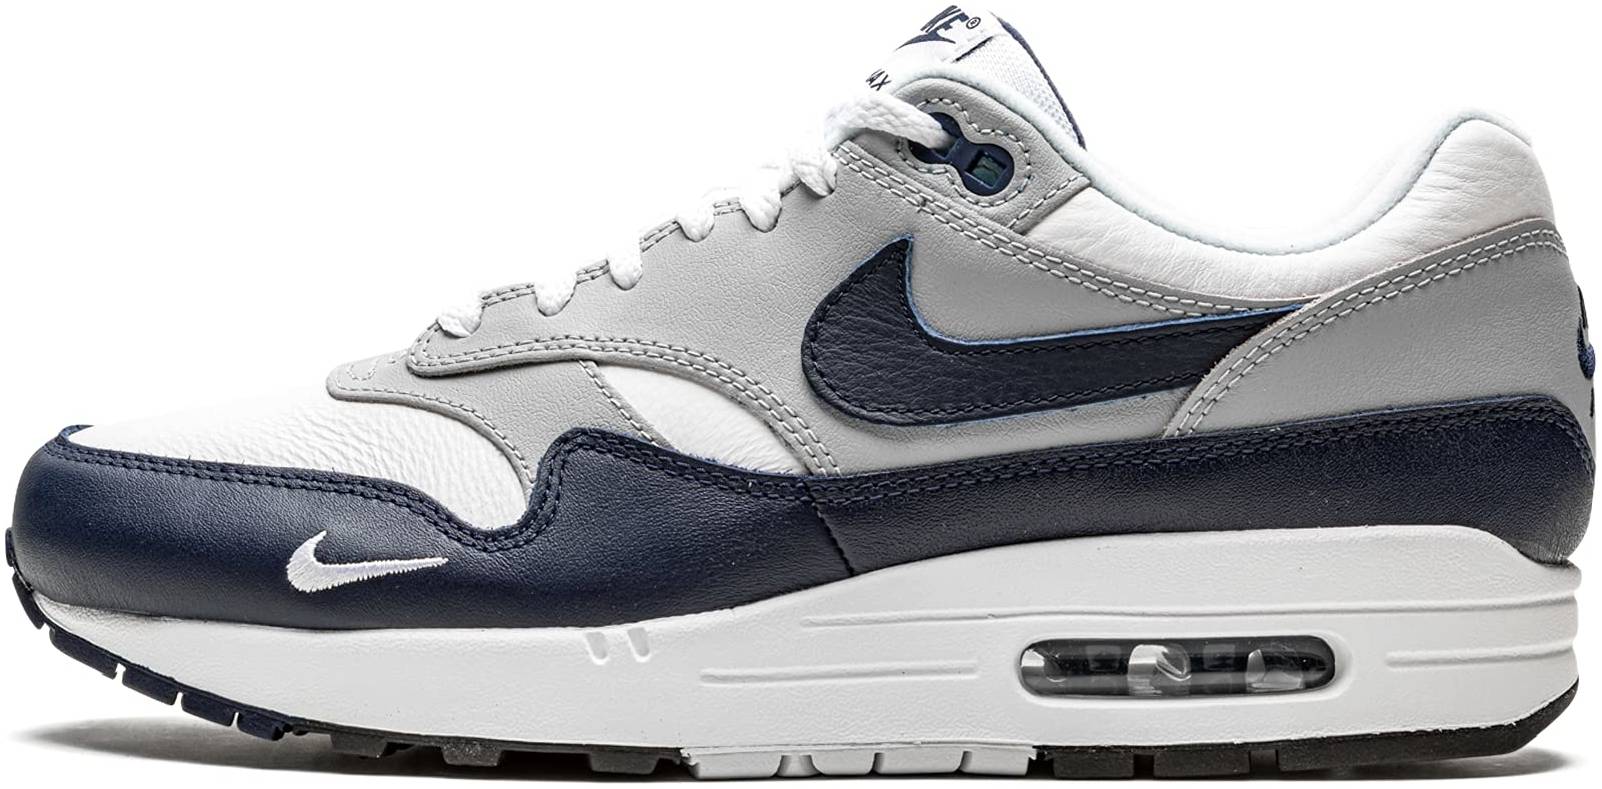 Legacy New arrival On a daily basis Nike Air Max 1 LV8 sneakers in 3 colors | RunRepeat